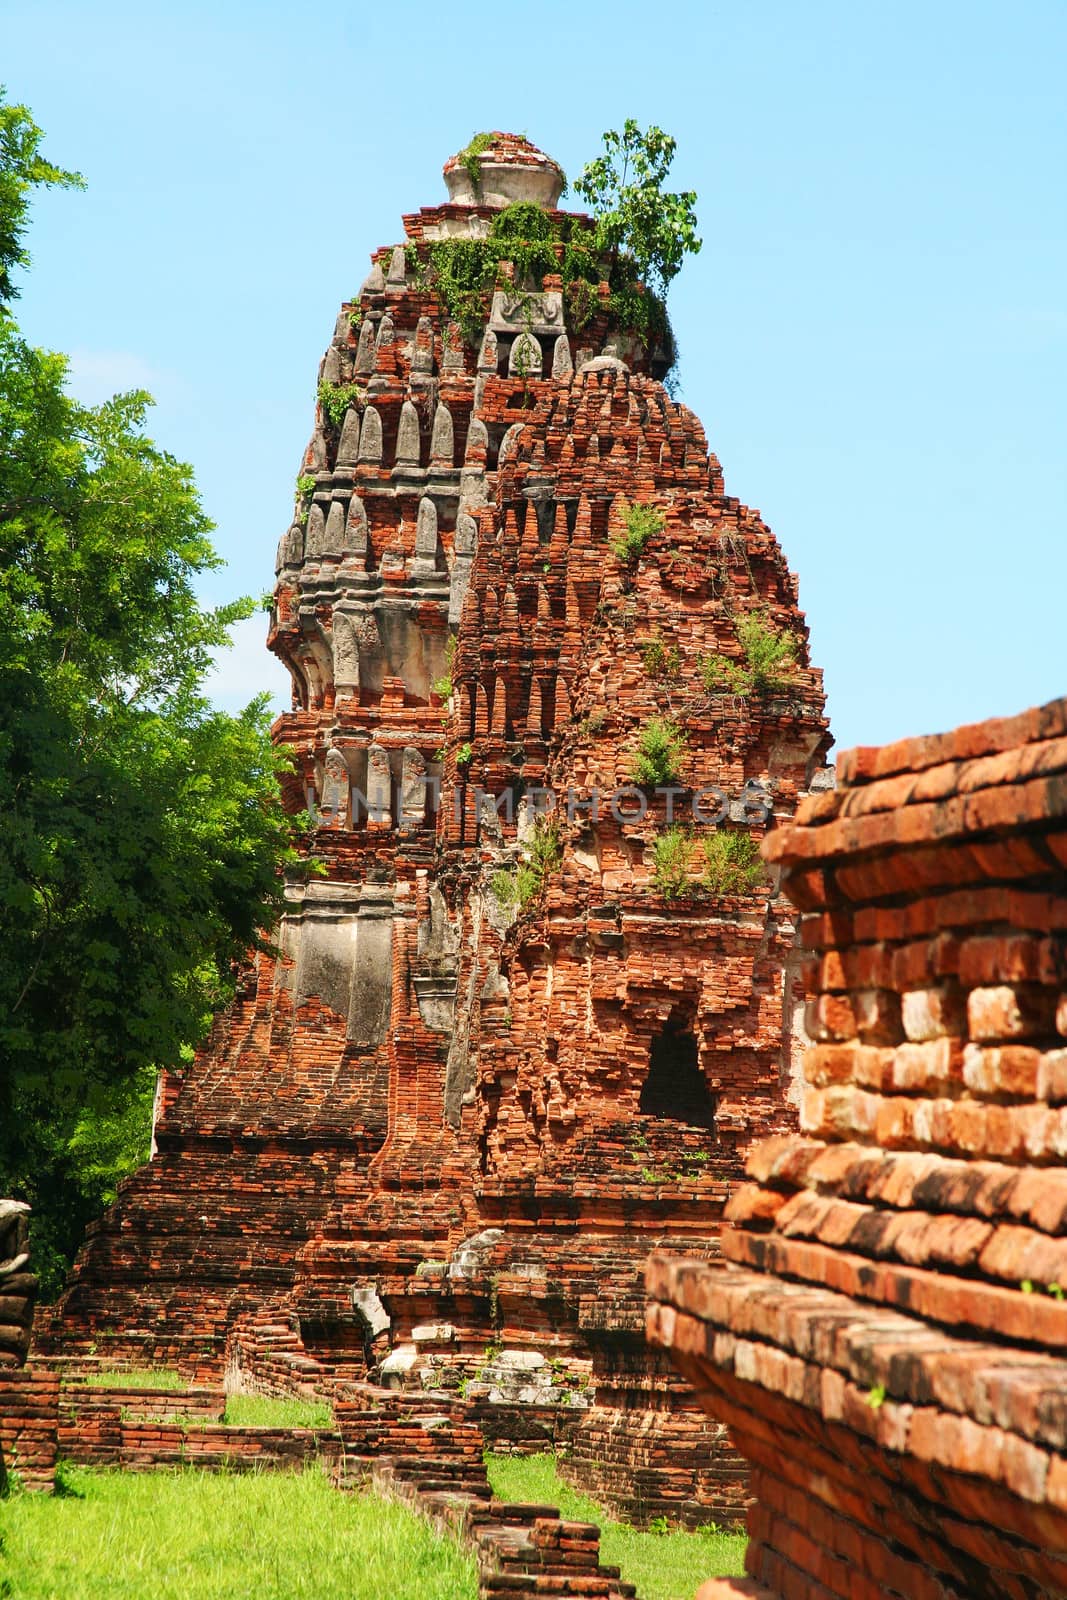 Ayuttahaya is an ancient city founded in 1350 and was the second capital of Siam.